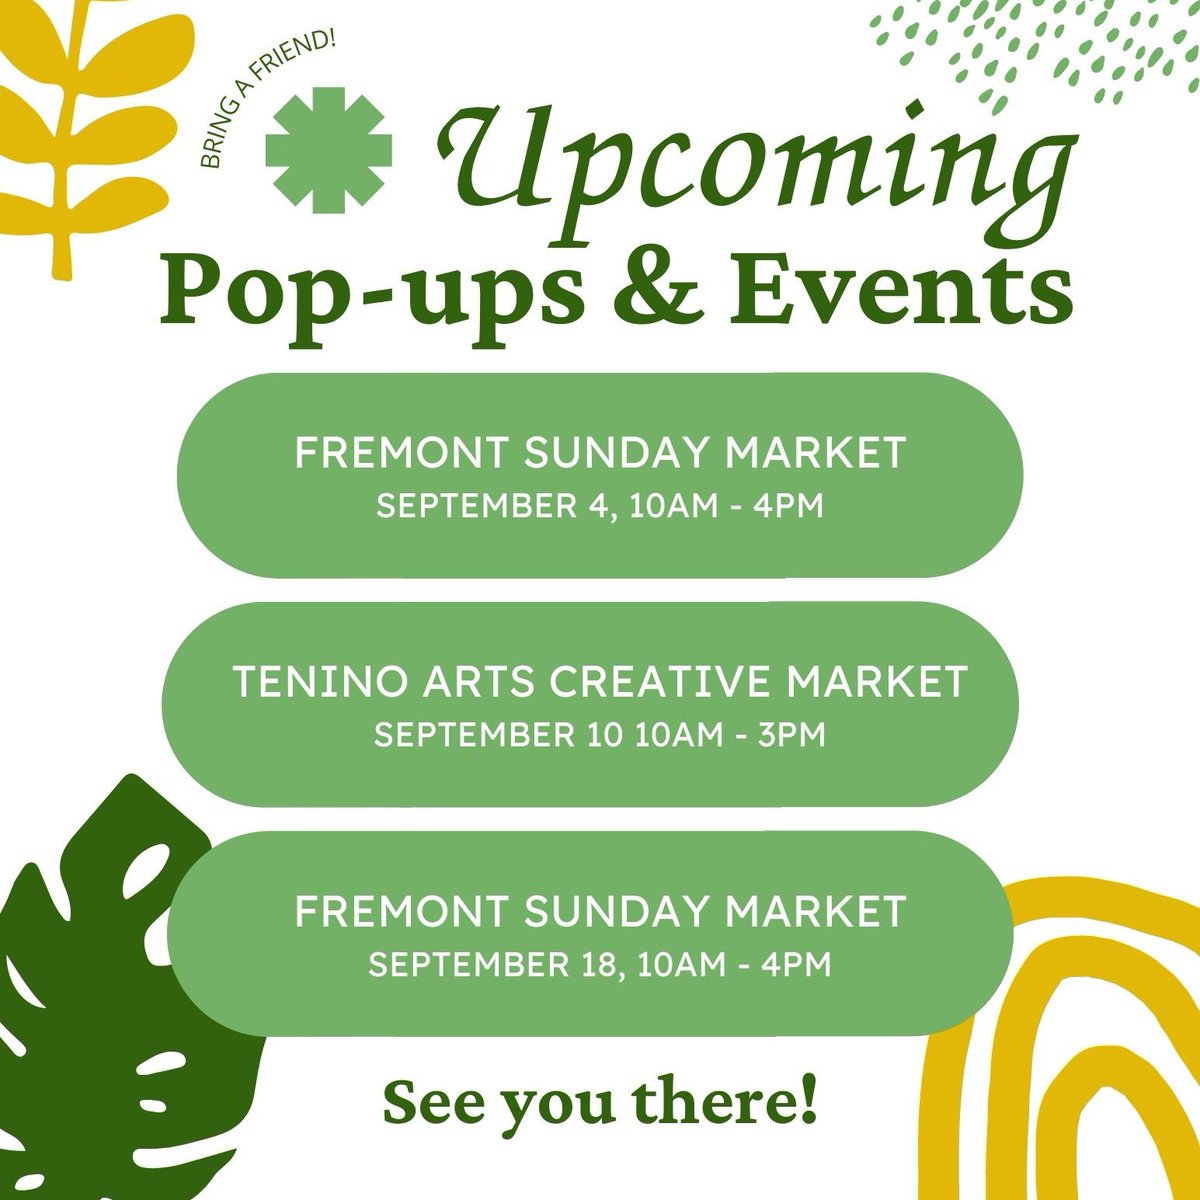 New month, new art markets! Catch me in Fremont twice this month and join me in Tenino for the last Creative Market of the season!
trishahall.com/events